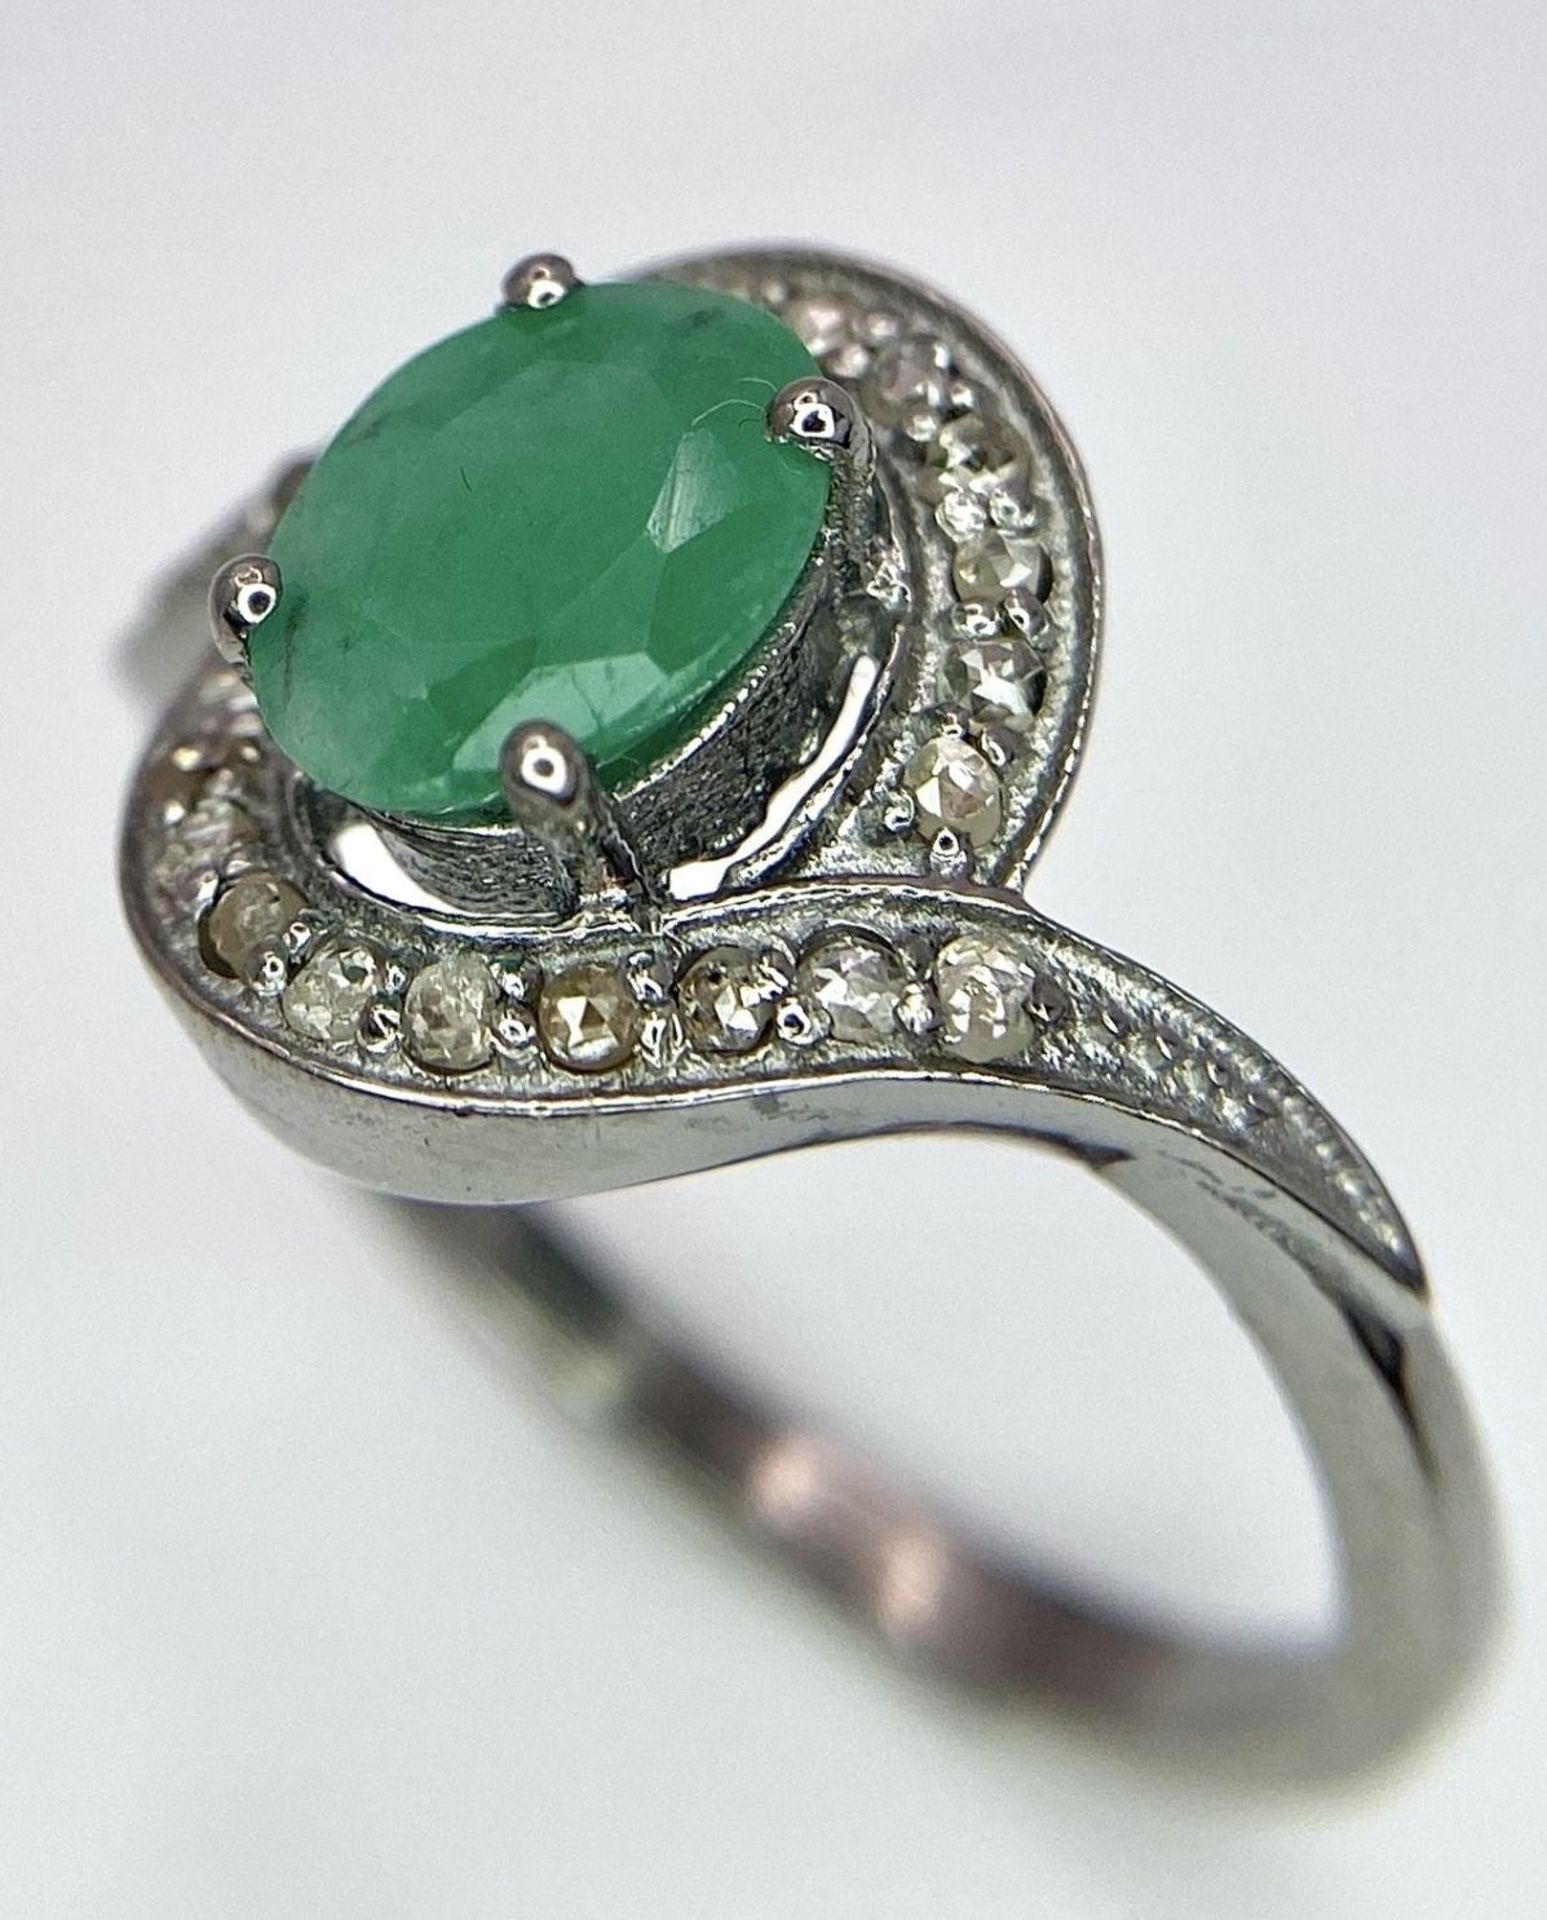 An Emerald Ring with a Rose Cut Diamond Surround. Set in 925 Sterling silver. Emerald - 0.70ct. - Image 5 of 7